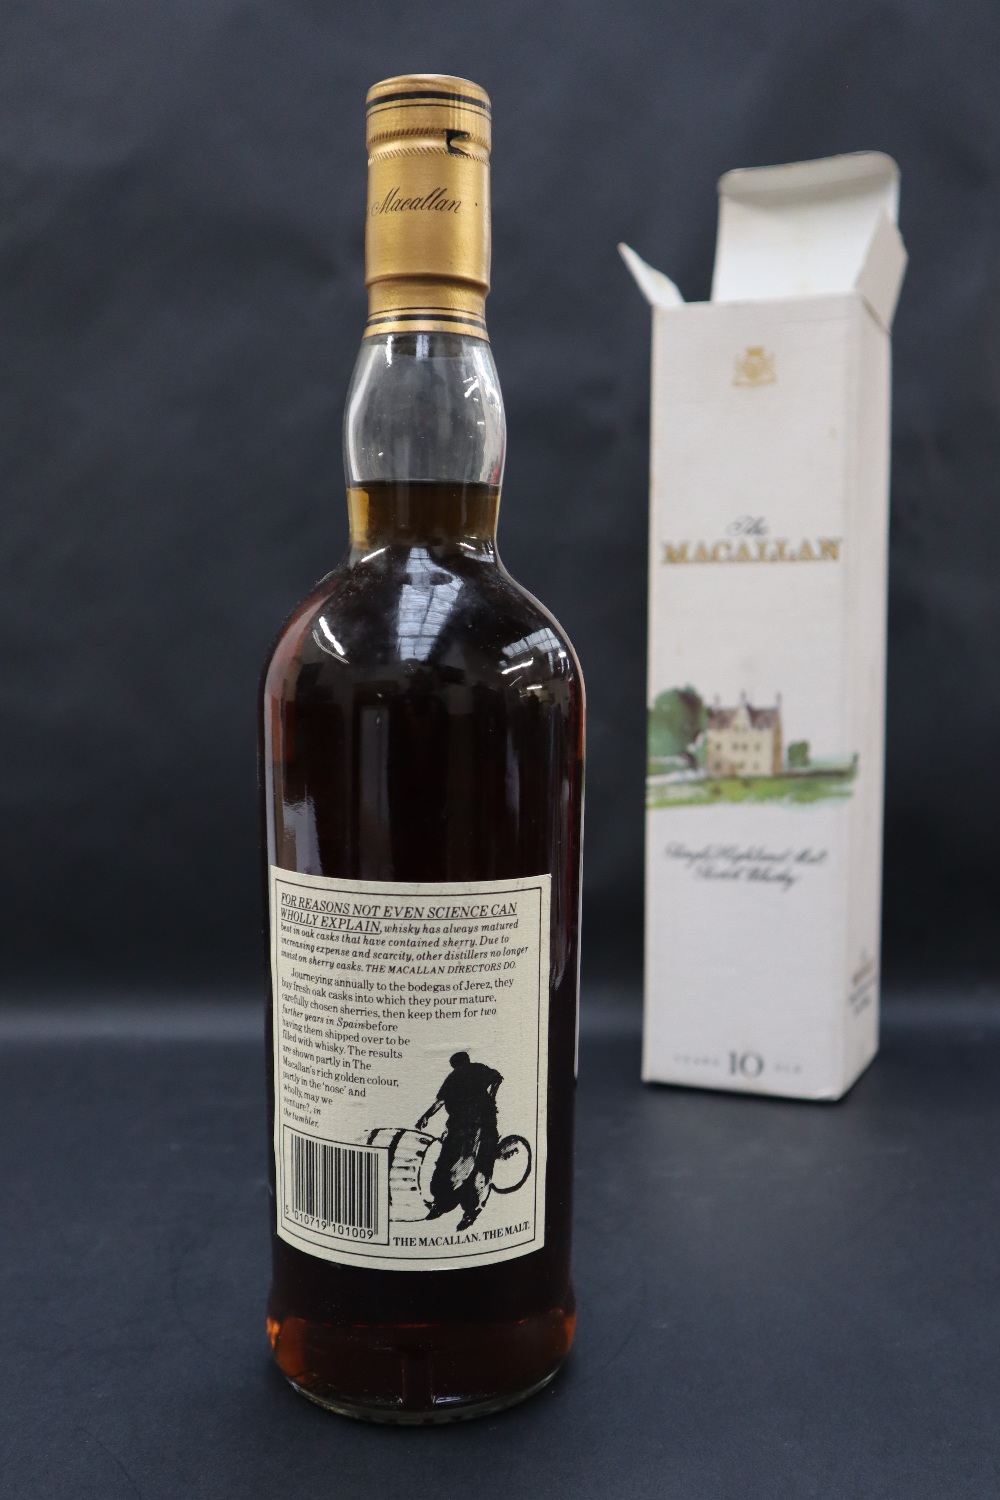 A bottle of The Macallan Single Highland Malt Scotch Whisky 10 Years Old, - Image 2 of 5